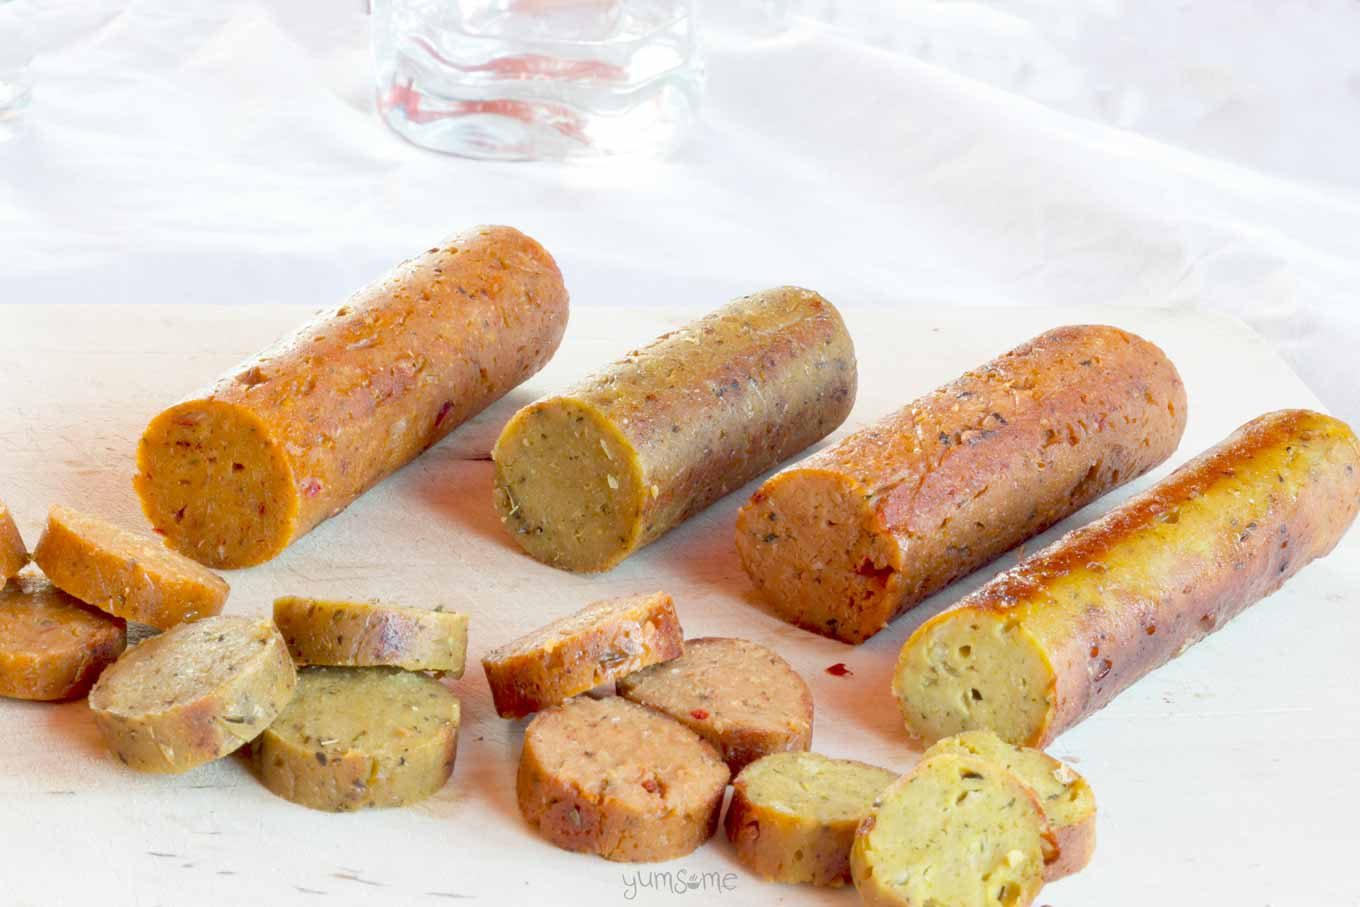 Four vegan sausages with a white background.